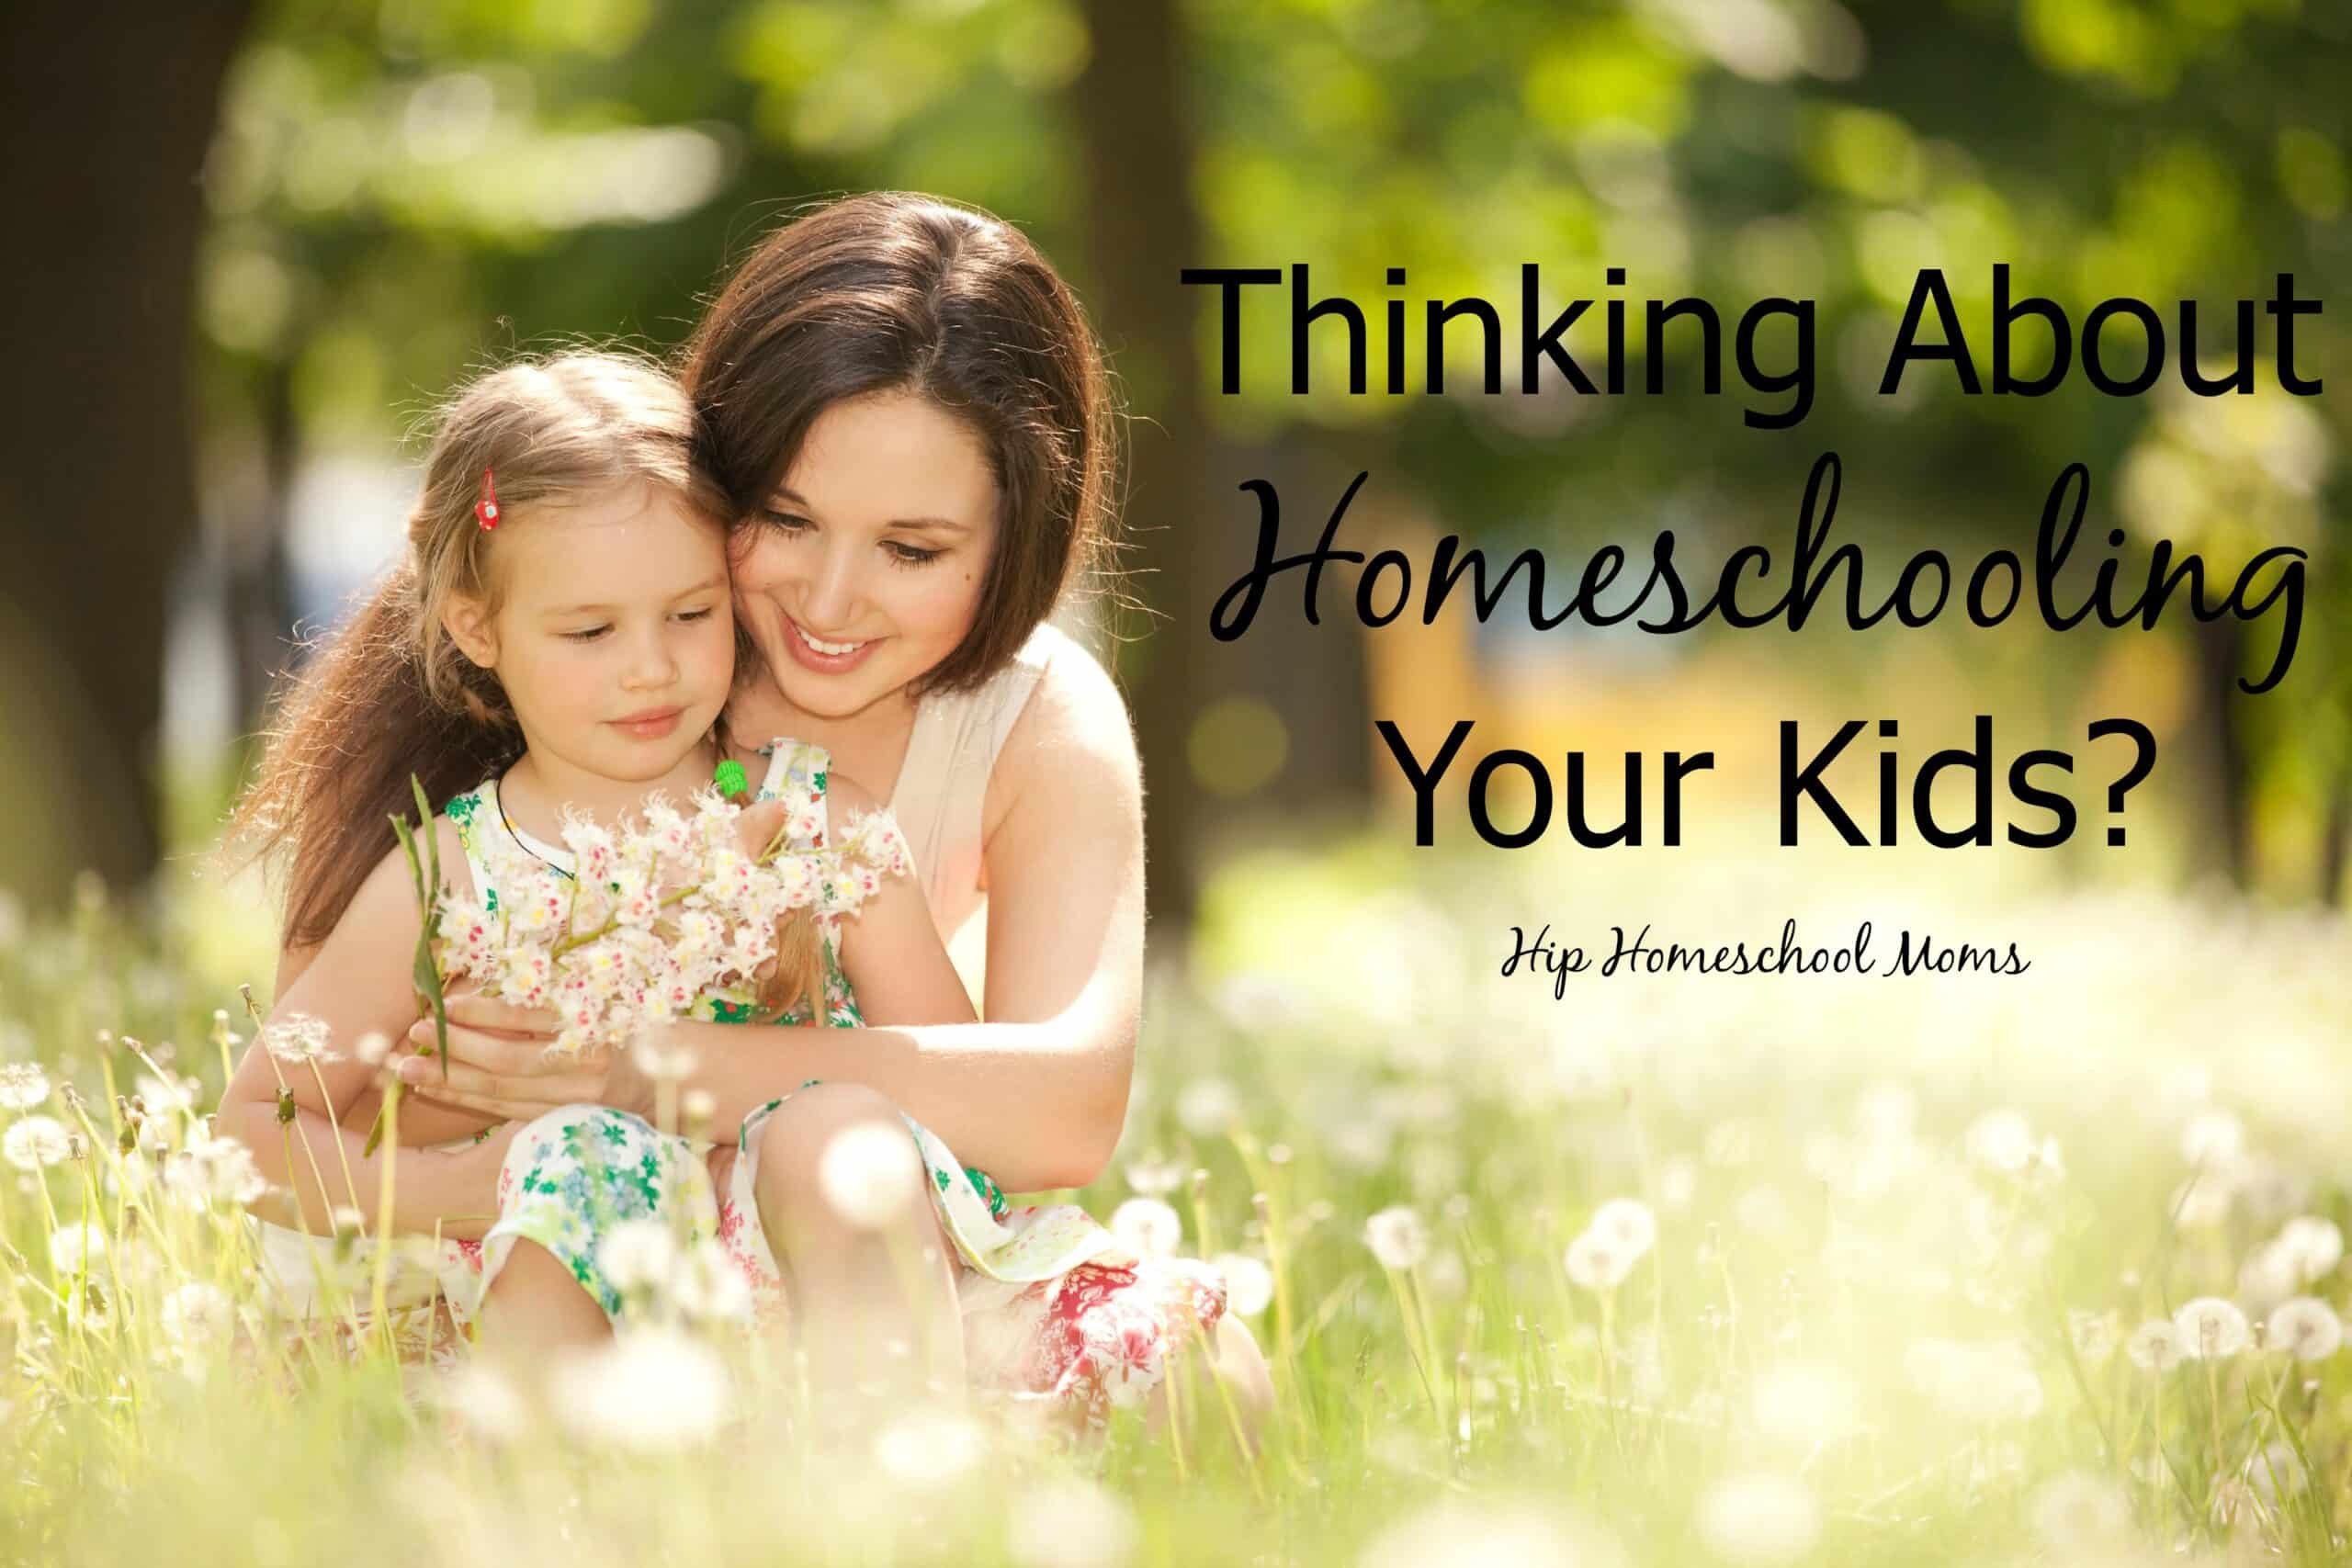 Thinking About Homeschooling Your Kids?